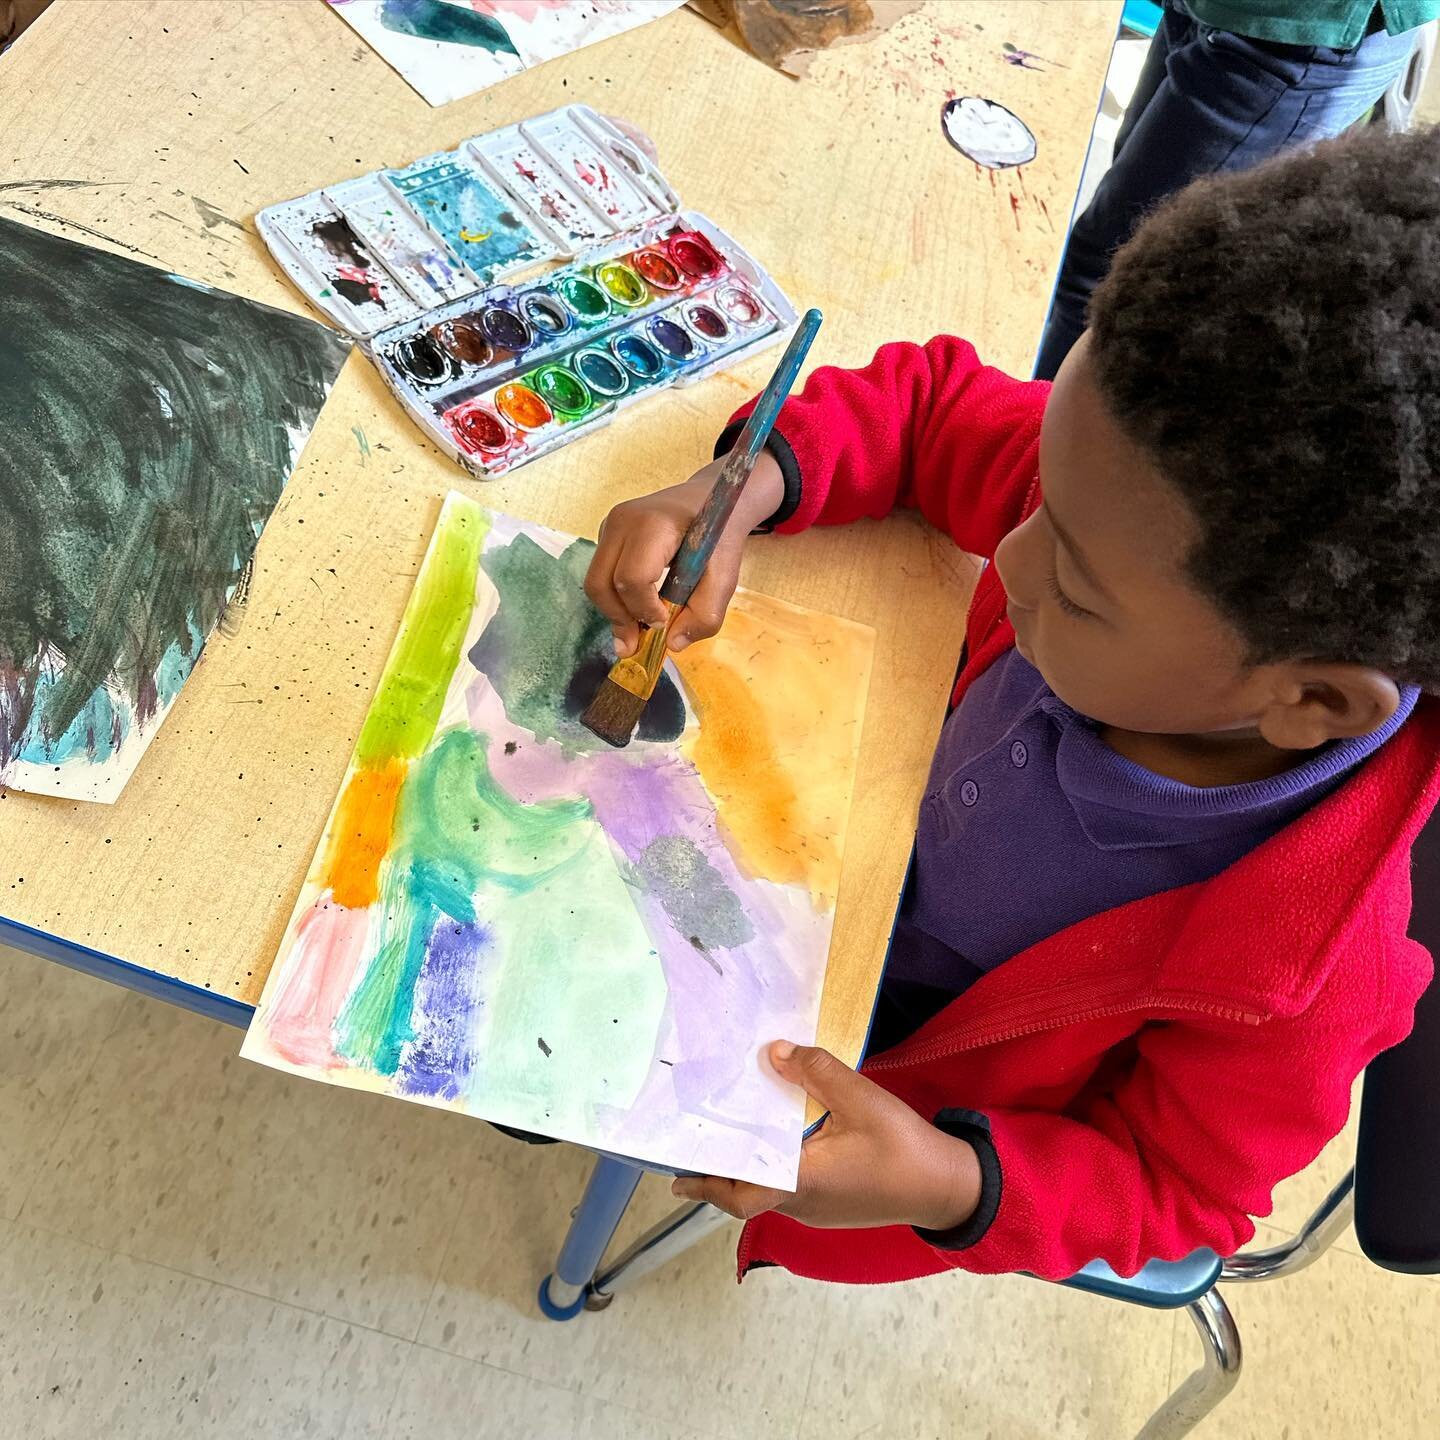 Thank you @deltaartsalliance for bringing the art to our &ldquo;Language, Literacy and Art&rdquo;series. We painted the sky, moon and stars to go along with our book, &ldquo;I Just Want to Say Goodnight&rdquo;. #literacy #mississippi #letstalkaboutit